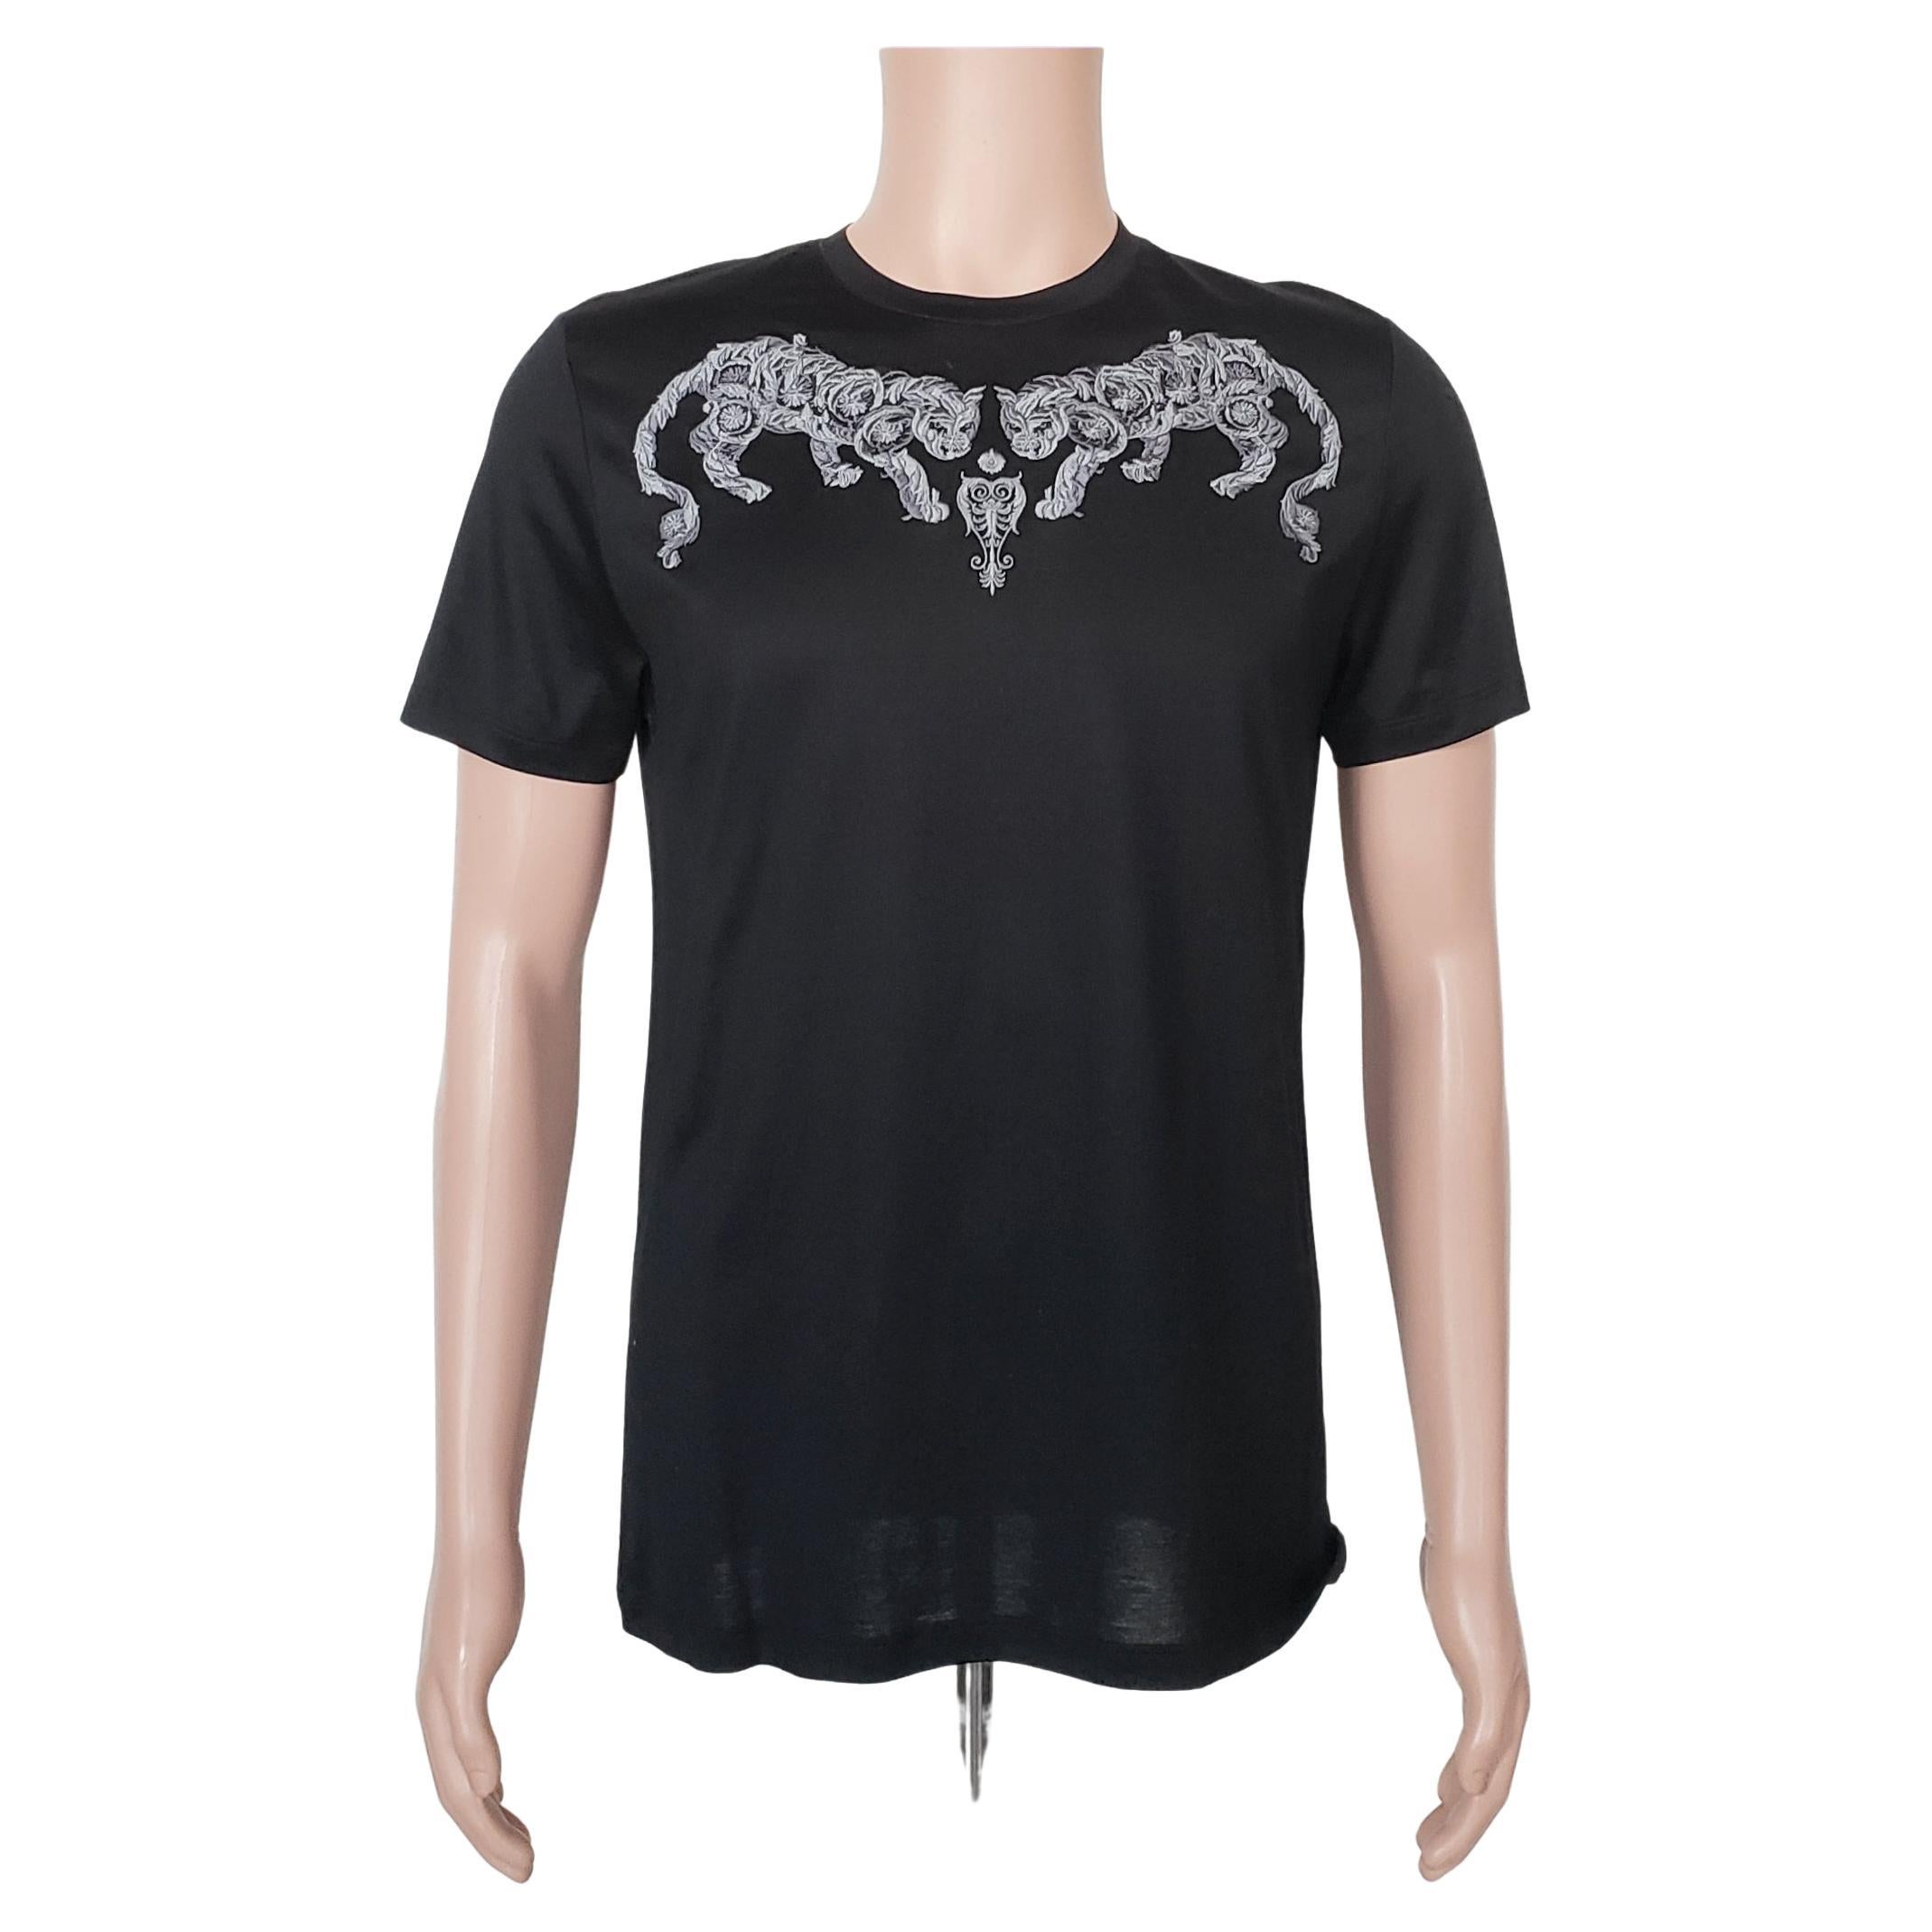 NEW VERSACE COLLECTION BLACK COTTON T-SHIRT with SILVER GRAY PRINT size M